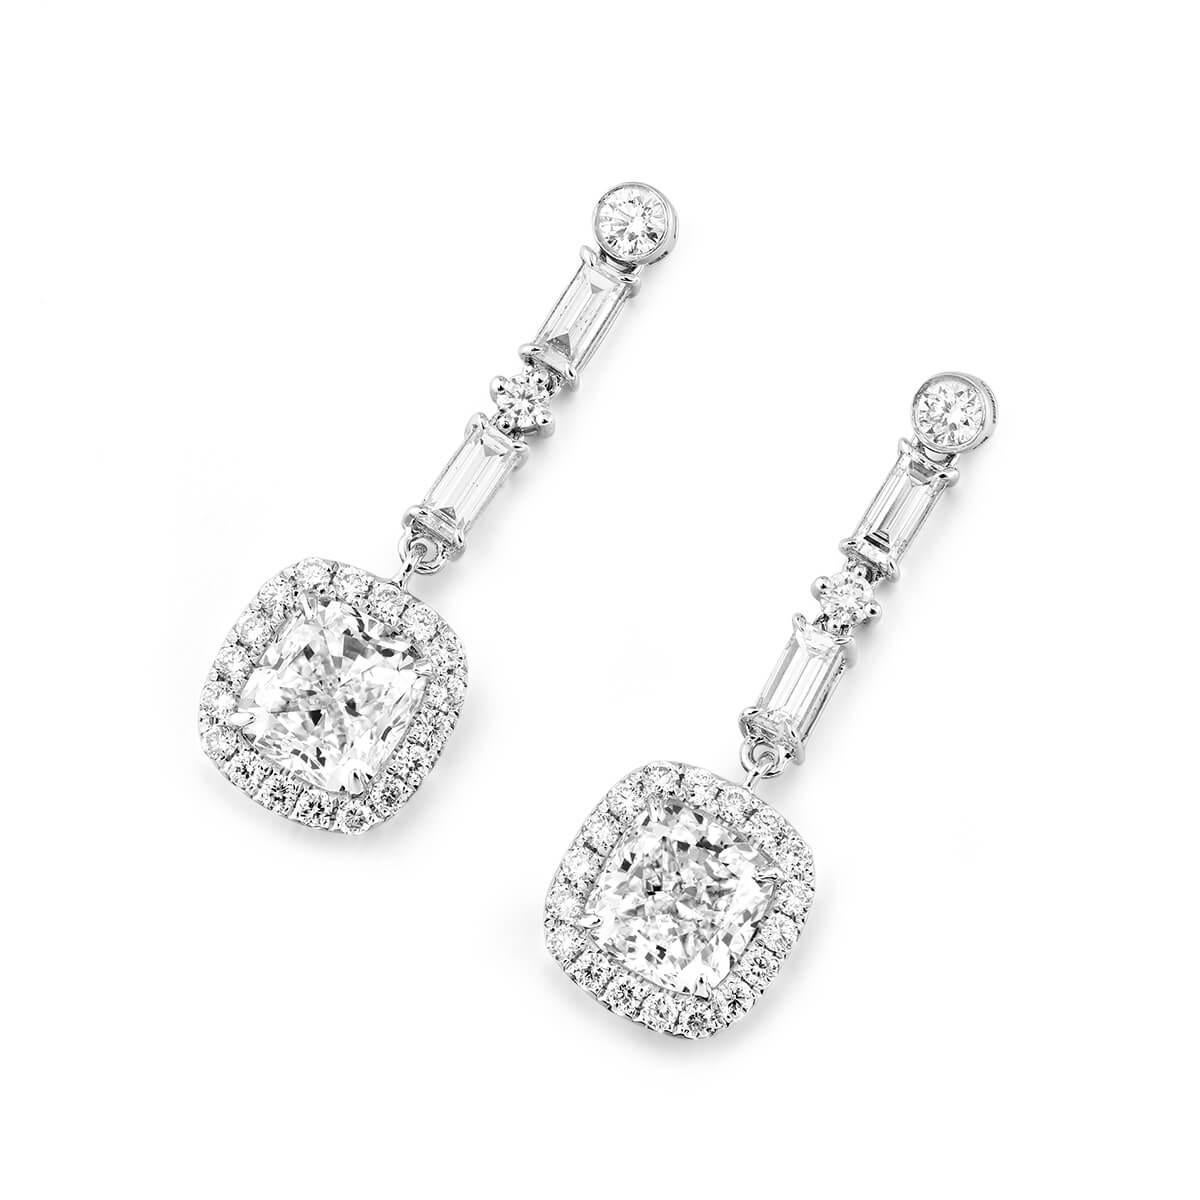 WHITE GOLD CUSHION AND BAGUETTE CUT DIAMOND EARRINGS - 2.72 CT


Set in 18K White gold


Total cushion cut diamond weight: 1.00 ct
[ 1 diamond ]
Color: D
Clarity: VVS1

Total cushion cut diamond weight: 1.01 ct
[ 1 diamond ]
Color: E
Clarity: